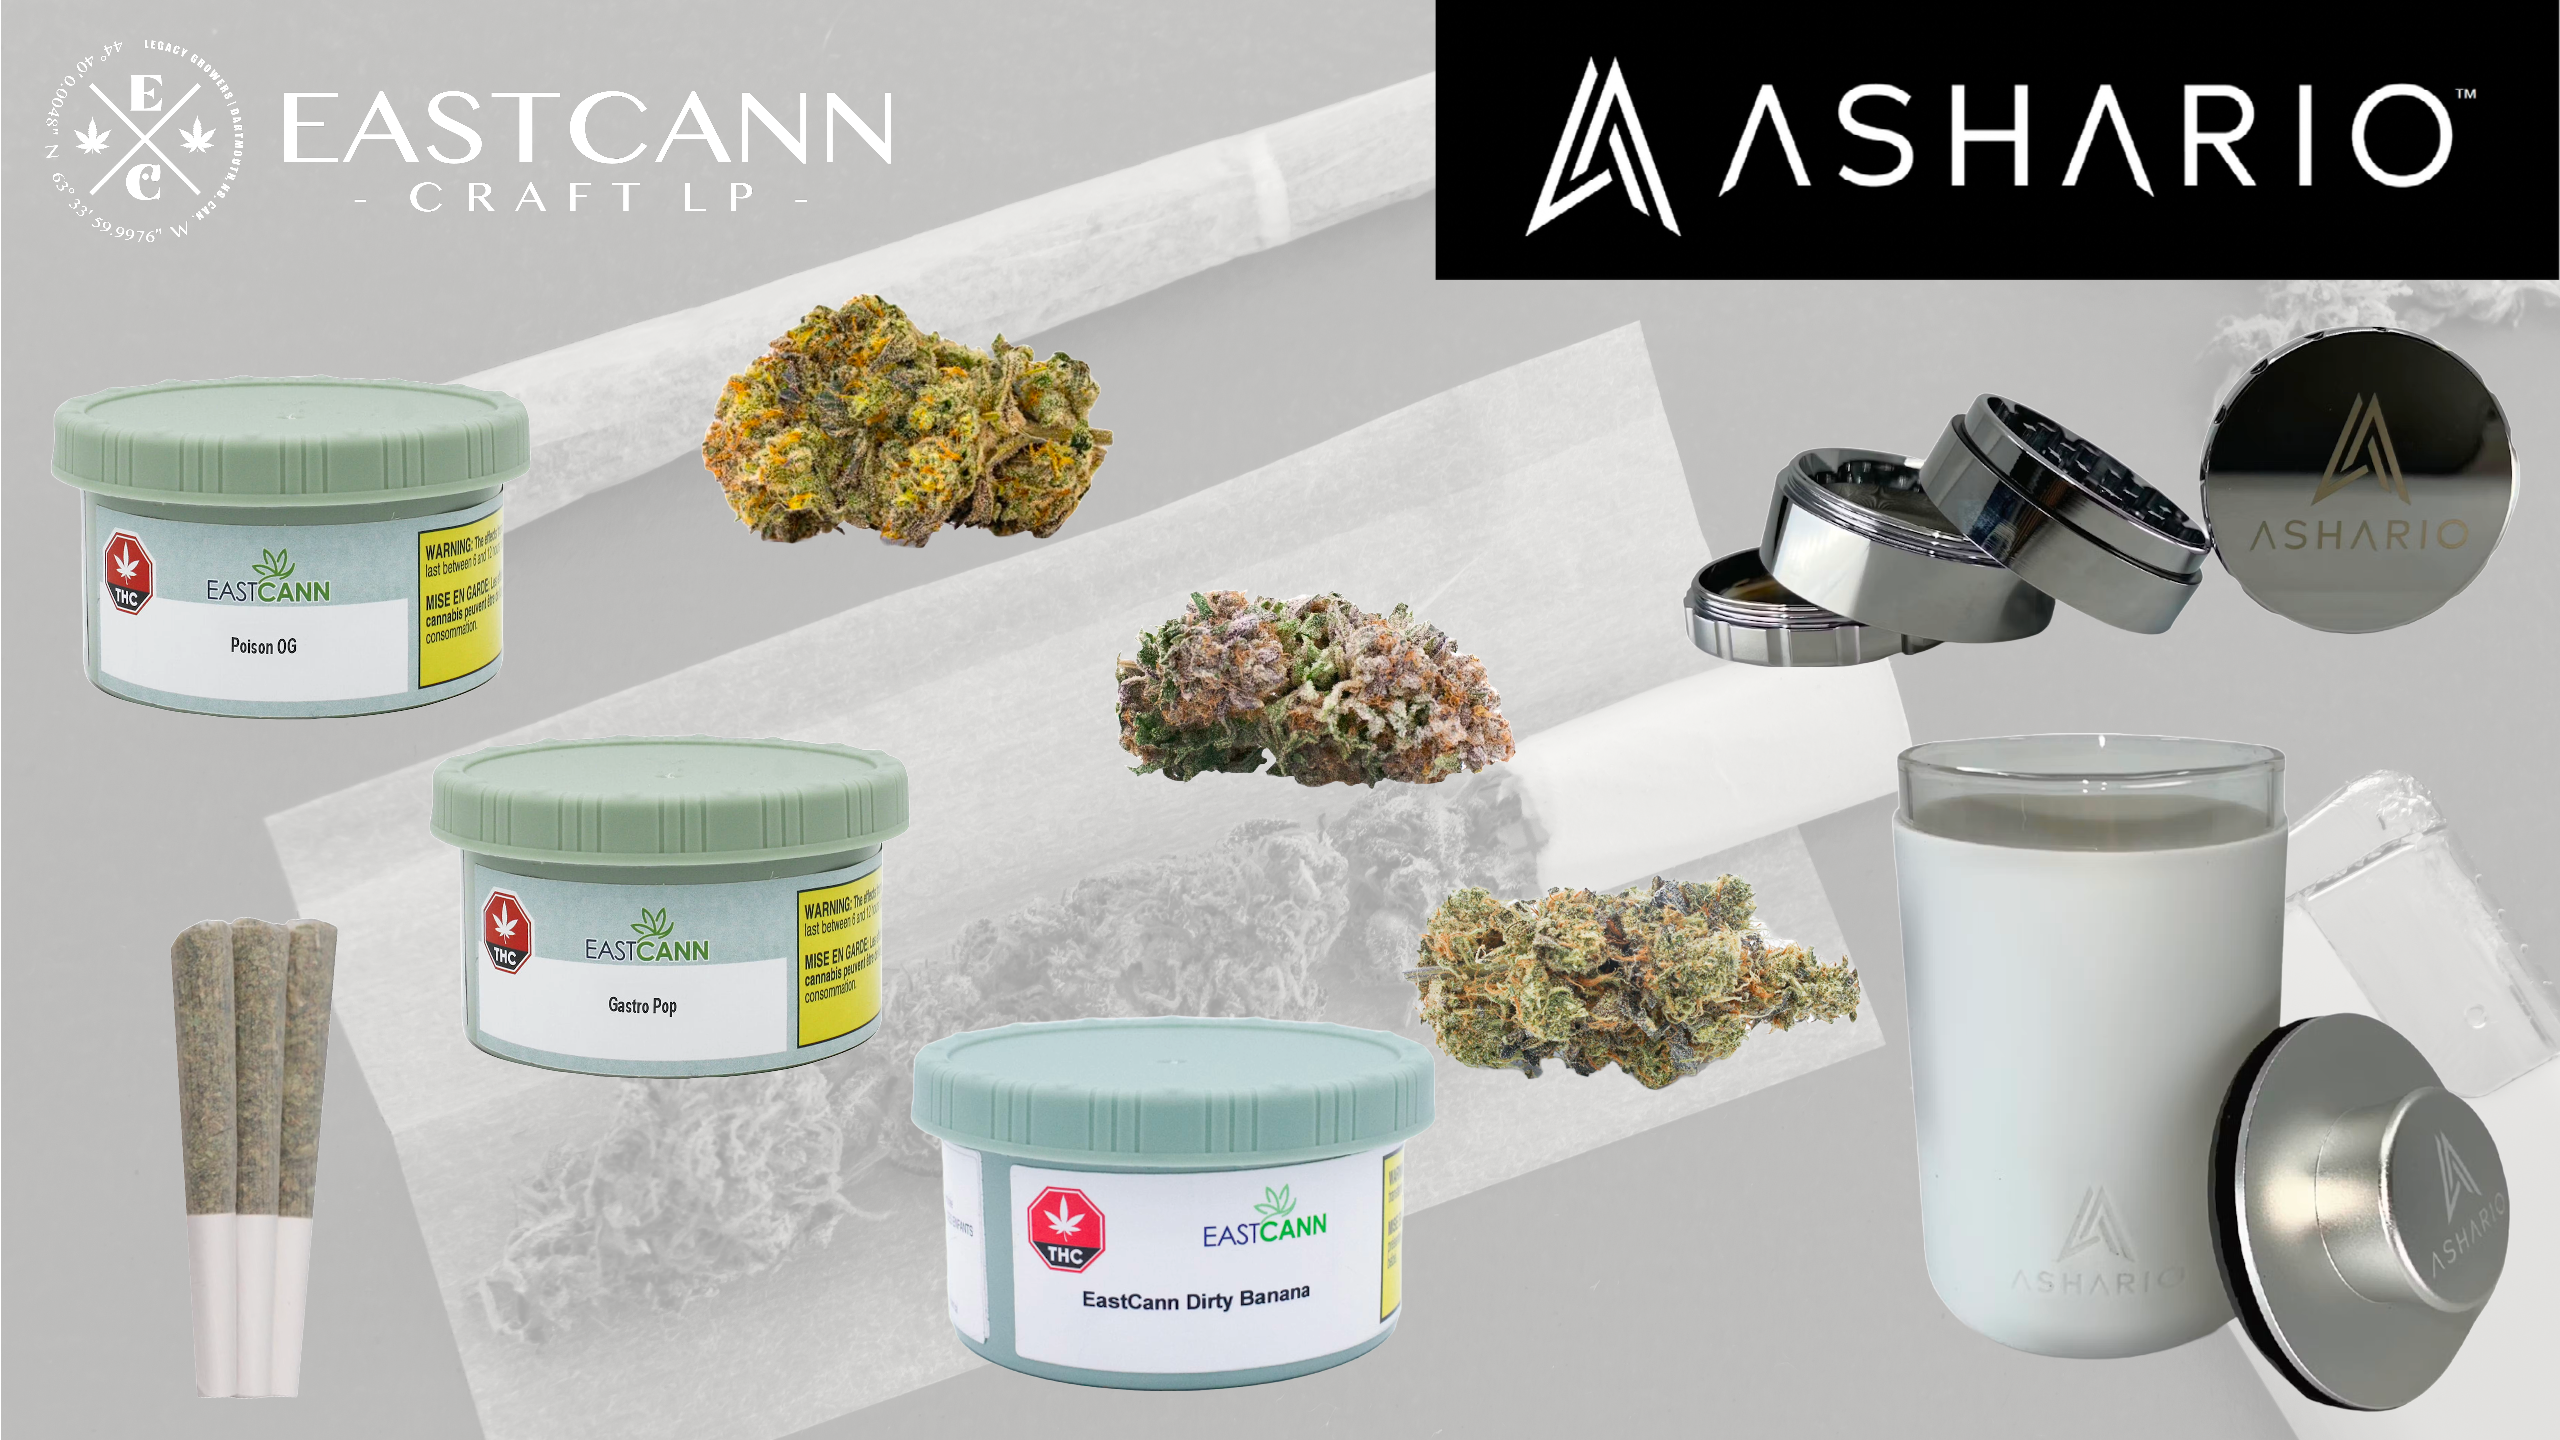 Explore the pinnacle of craft flower excellence with Eastcann, the epitome of quality and sophistication in the cannabis world, now showcased at Ashario.